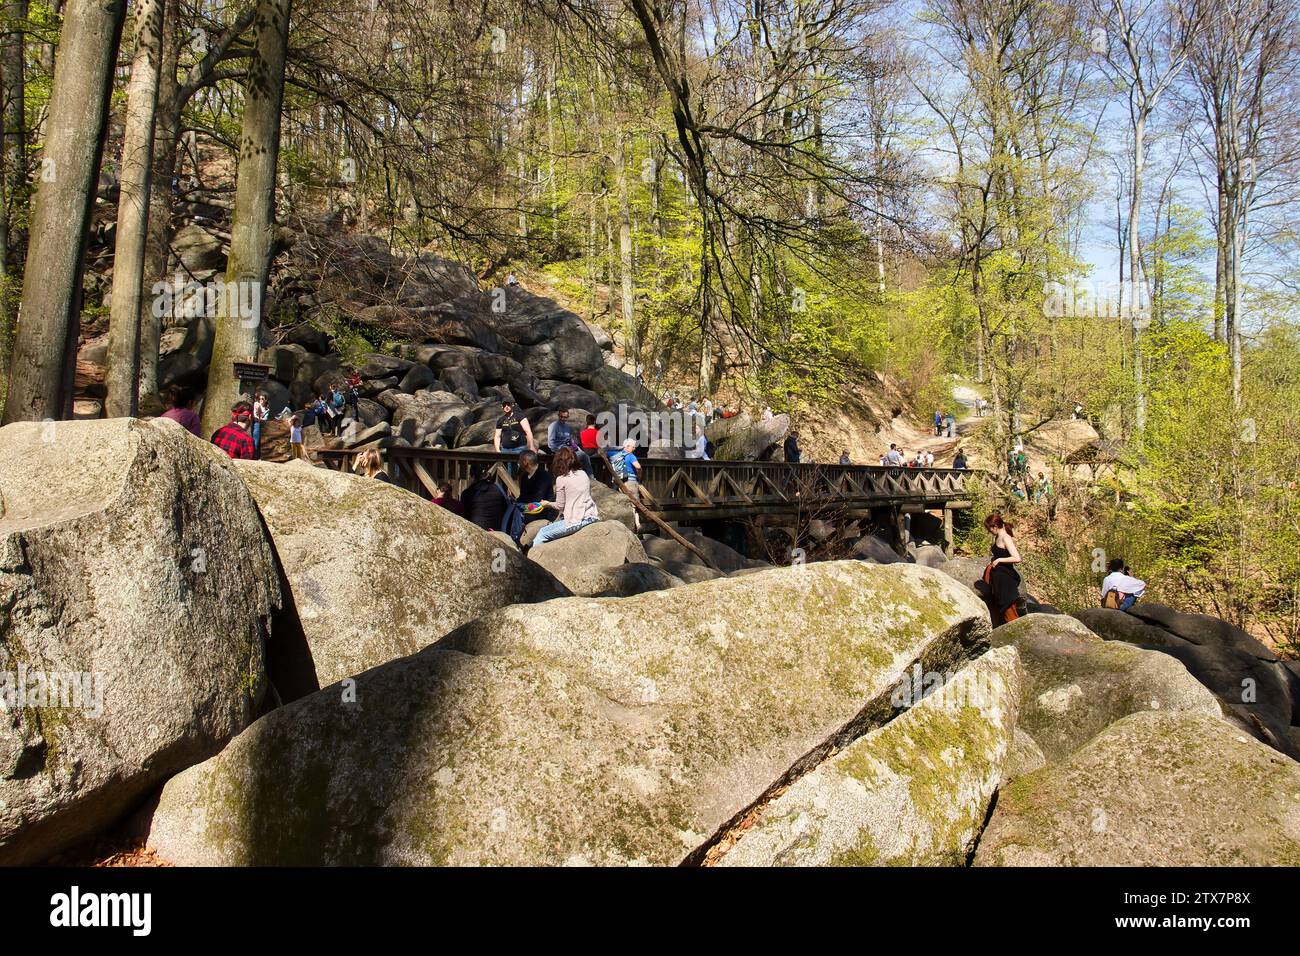 Lautertal, Germany - April 24, 2021: Side of bridge over large rocks on a hill at Felsenmeer on a spring day in Germany. Stock Photo